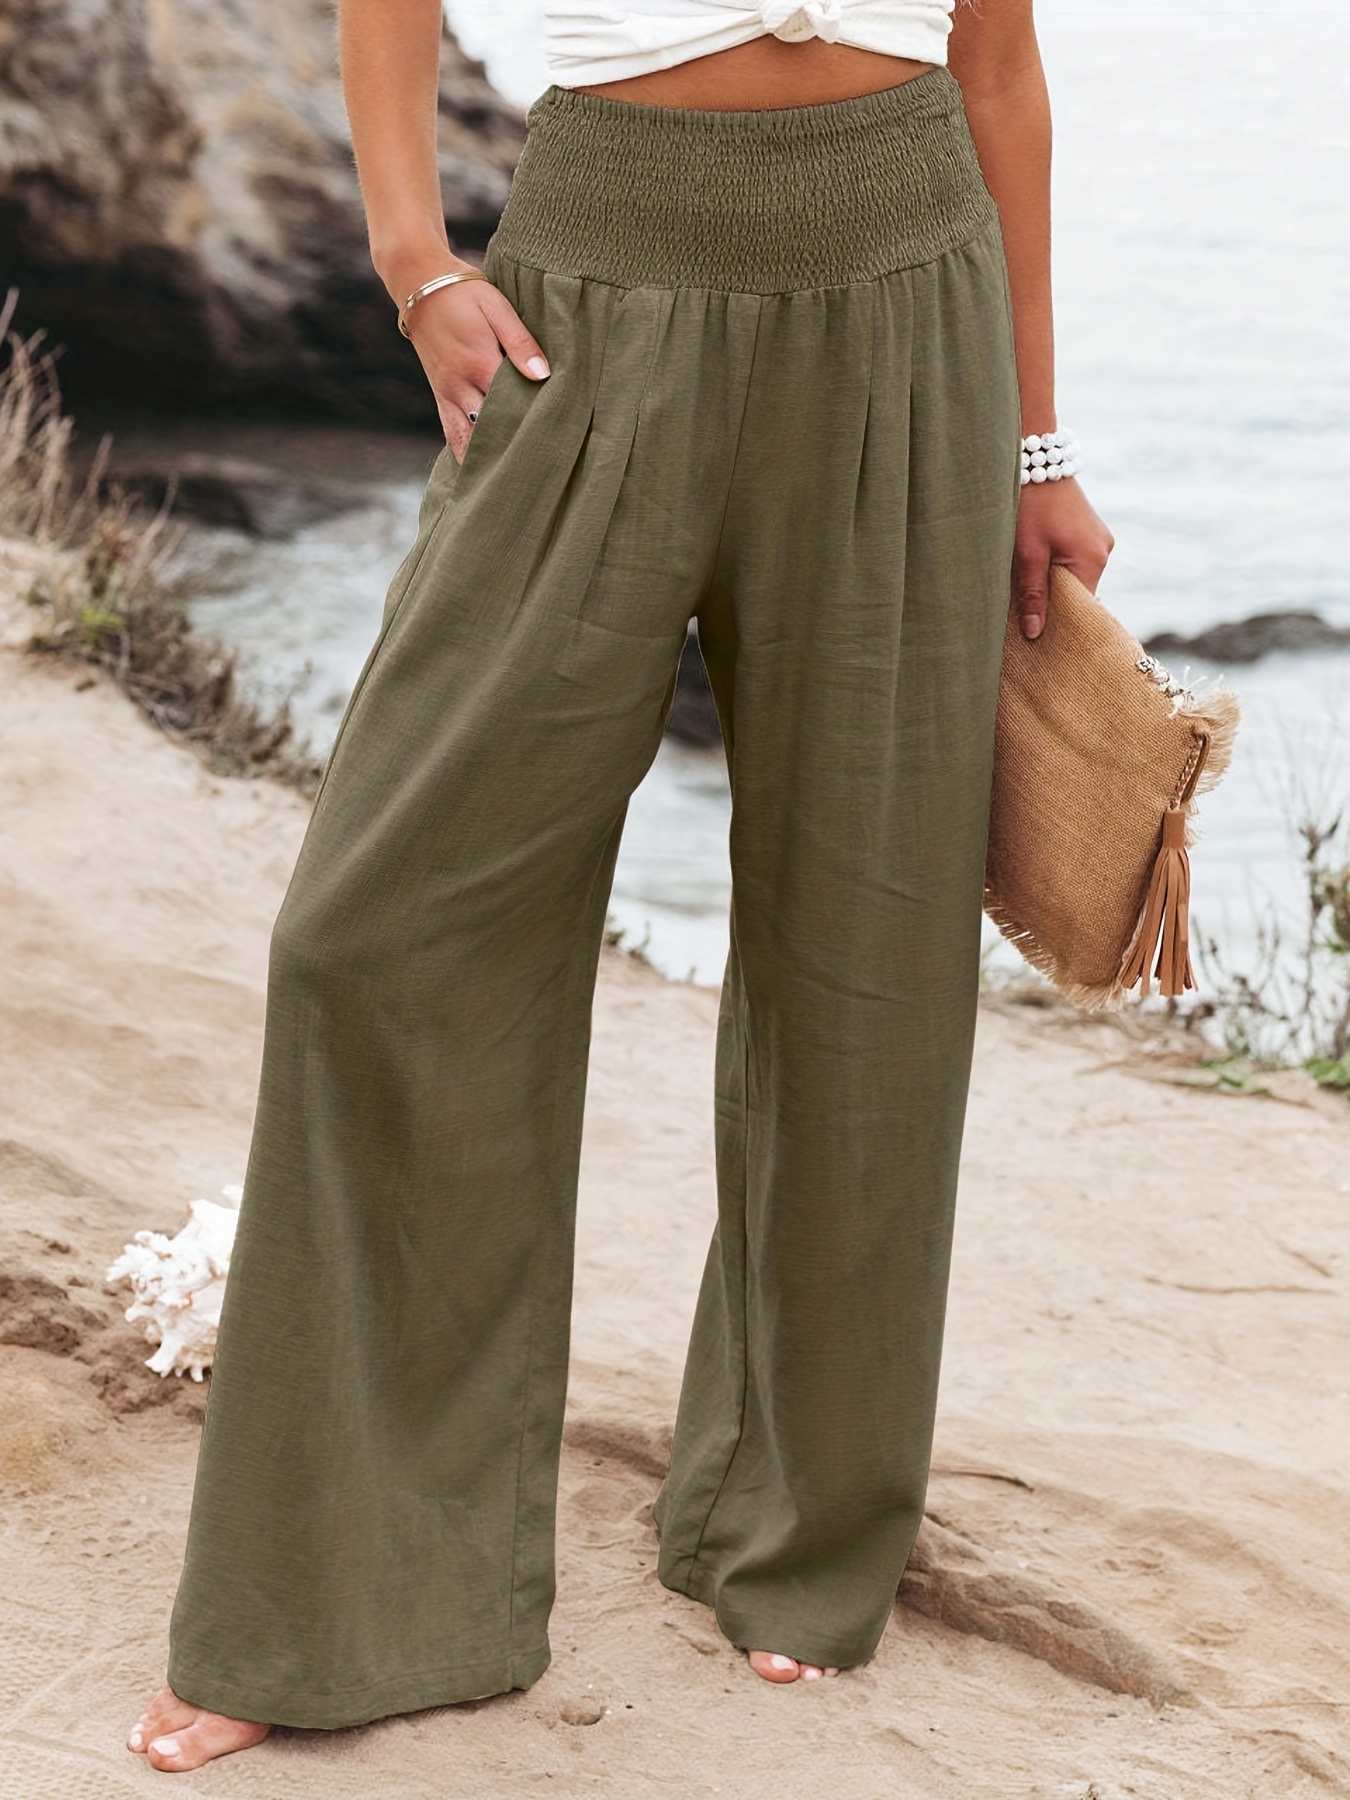 DUSHU Simple Style Wide Leg Pants Women Autumn High Waist Slim Casual Solid  Color Available in Length and Short Female Trousers